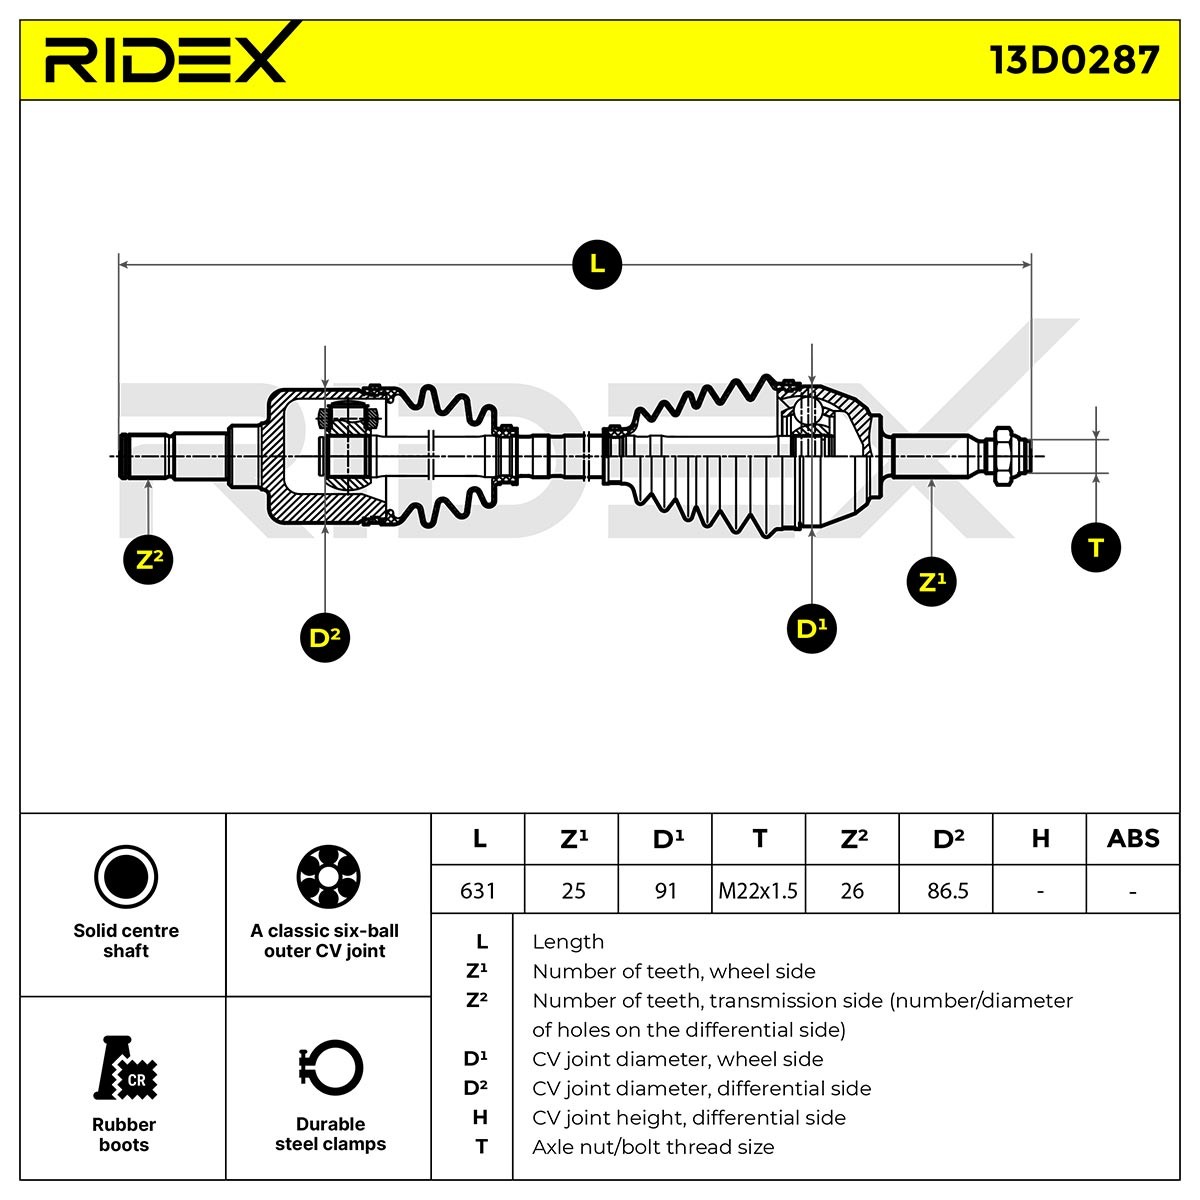 Drive shaft 13D0287 from RIDEX